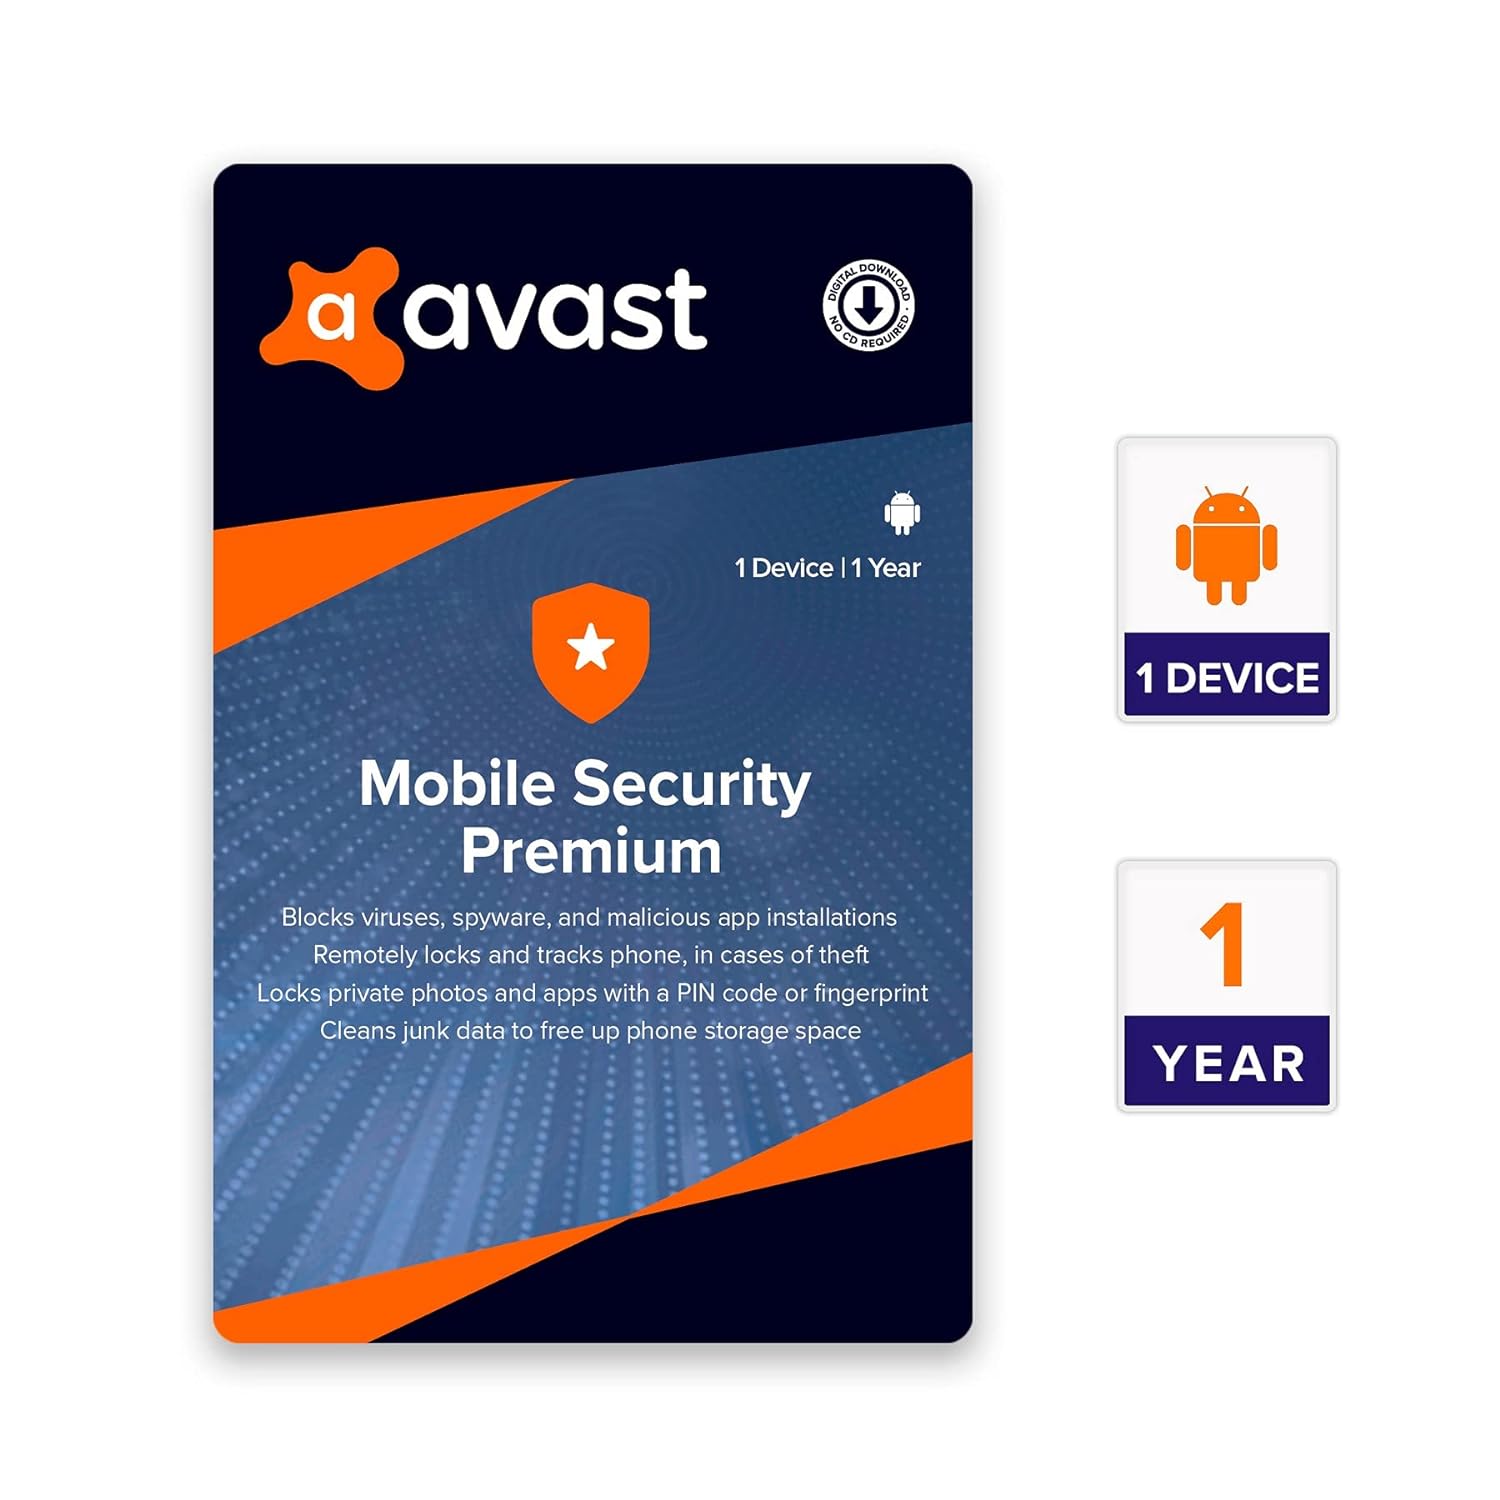 Avast Ultimate Mobile Security Premium for Android 2023 Key (1 Year / 1 Device) $7.41